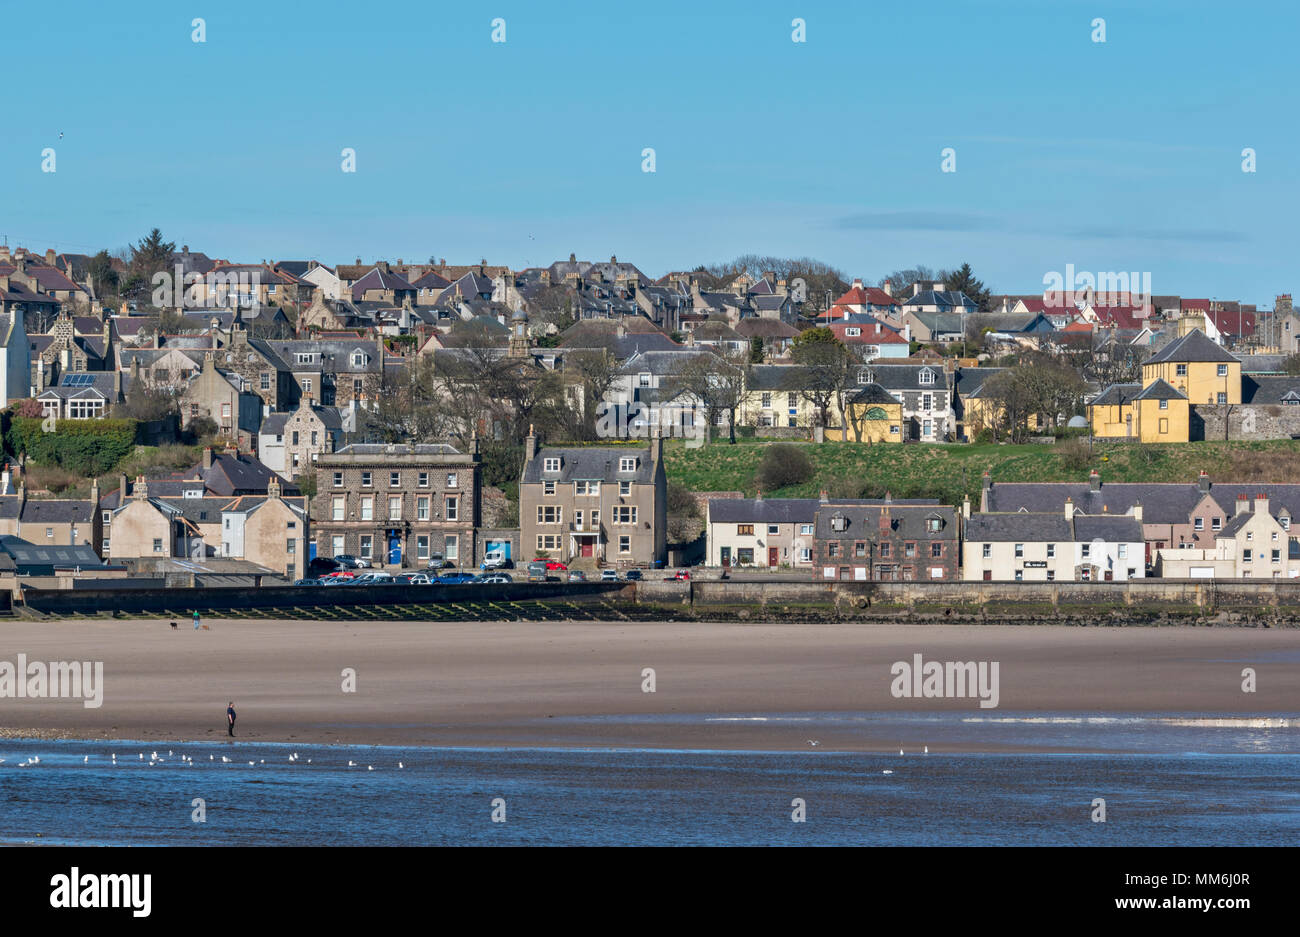 BANFF TOWN ABERDEENSHIRE SCOTLAND SEEN FROM ACROSS SANDS WHERE THE RIVER DEVERON ENTERS THE SEA PART THREE Stock Photo